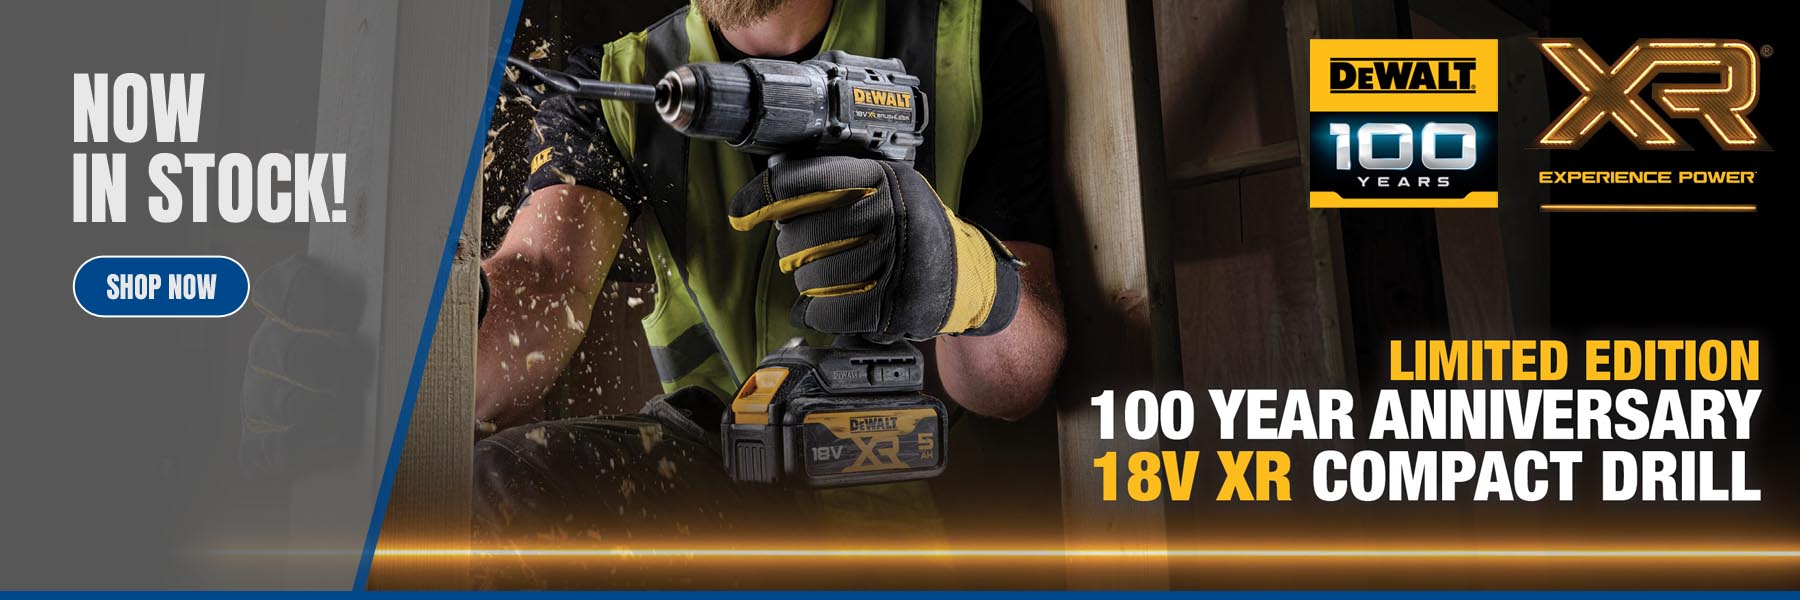 SHOP NOW - DeWalt 100 Year DCD100P2T 18v Cordless Combi Drill Kit - LIMITED EDITION